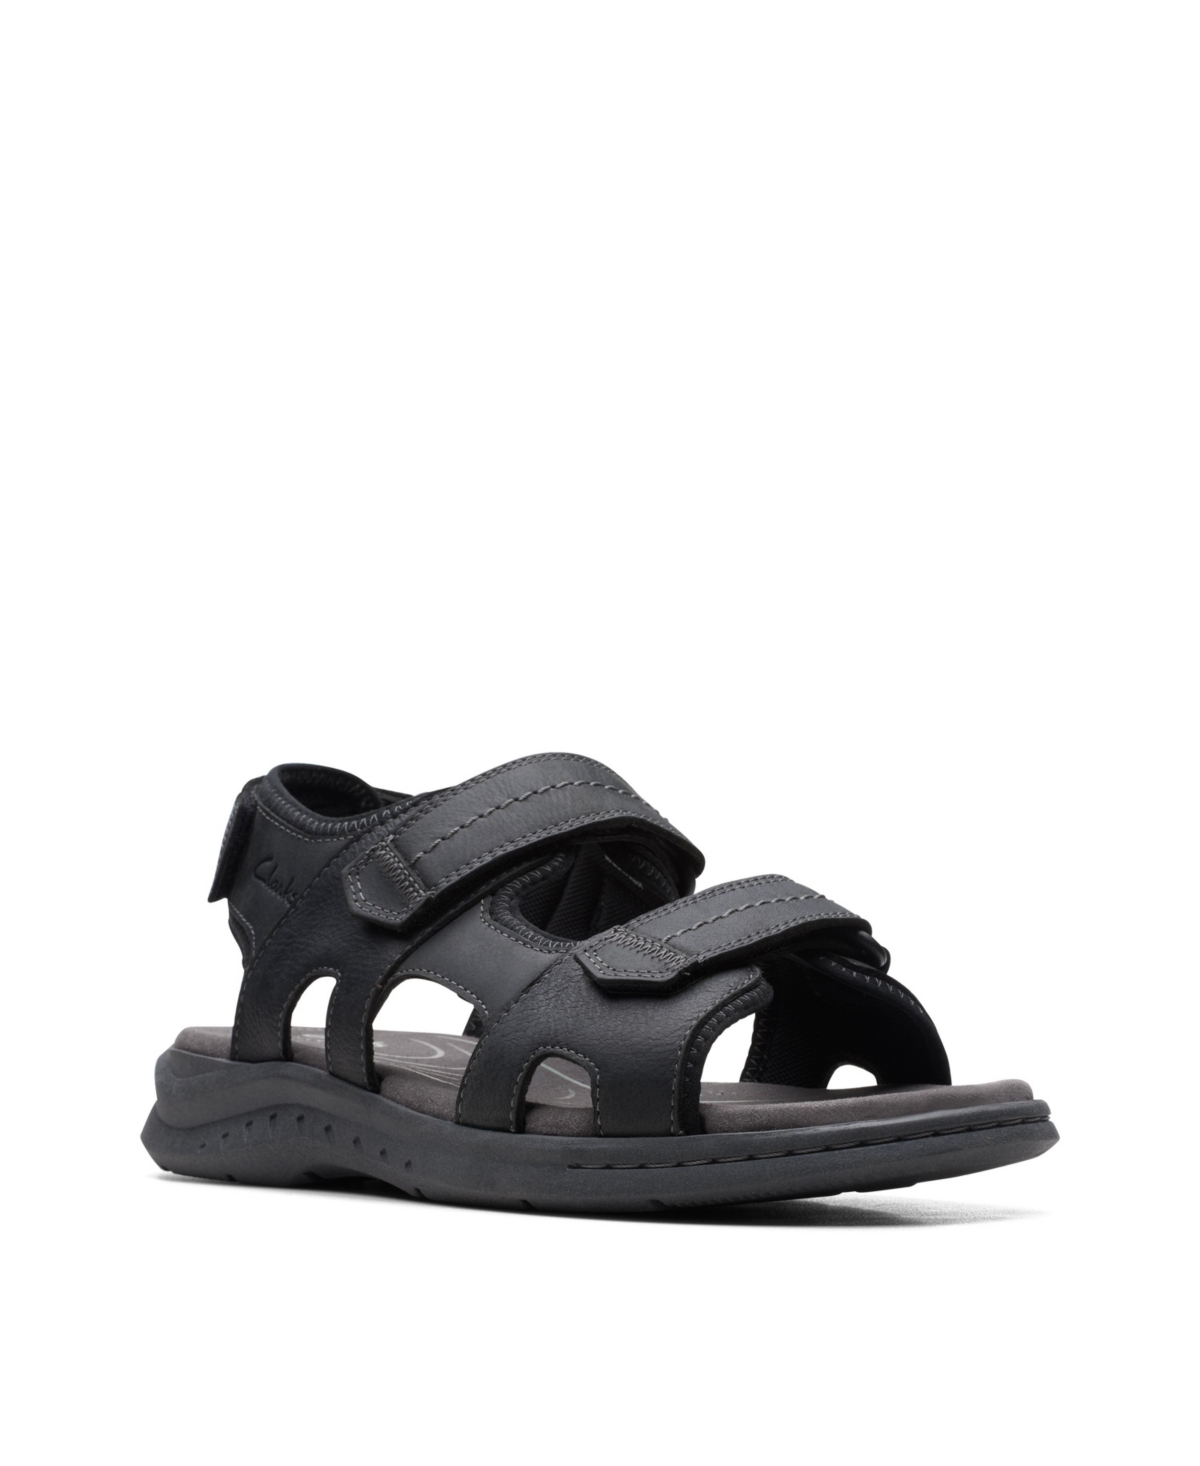 Clarks Men's Walkford Casual Walk Sandals In Black Leather